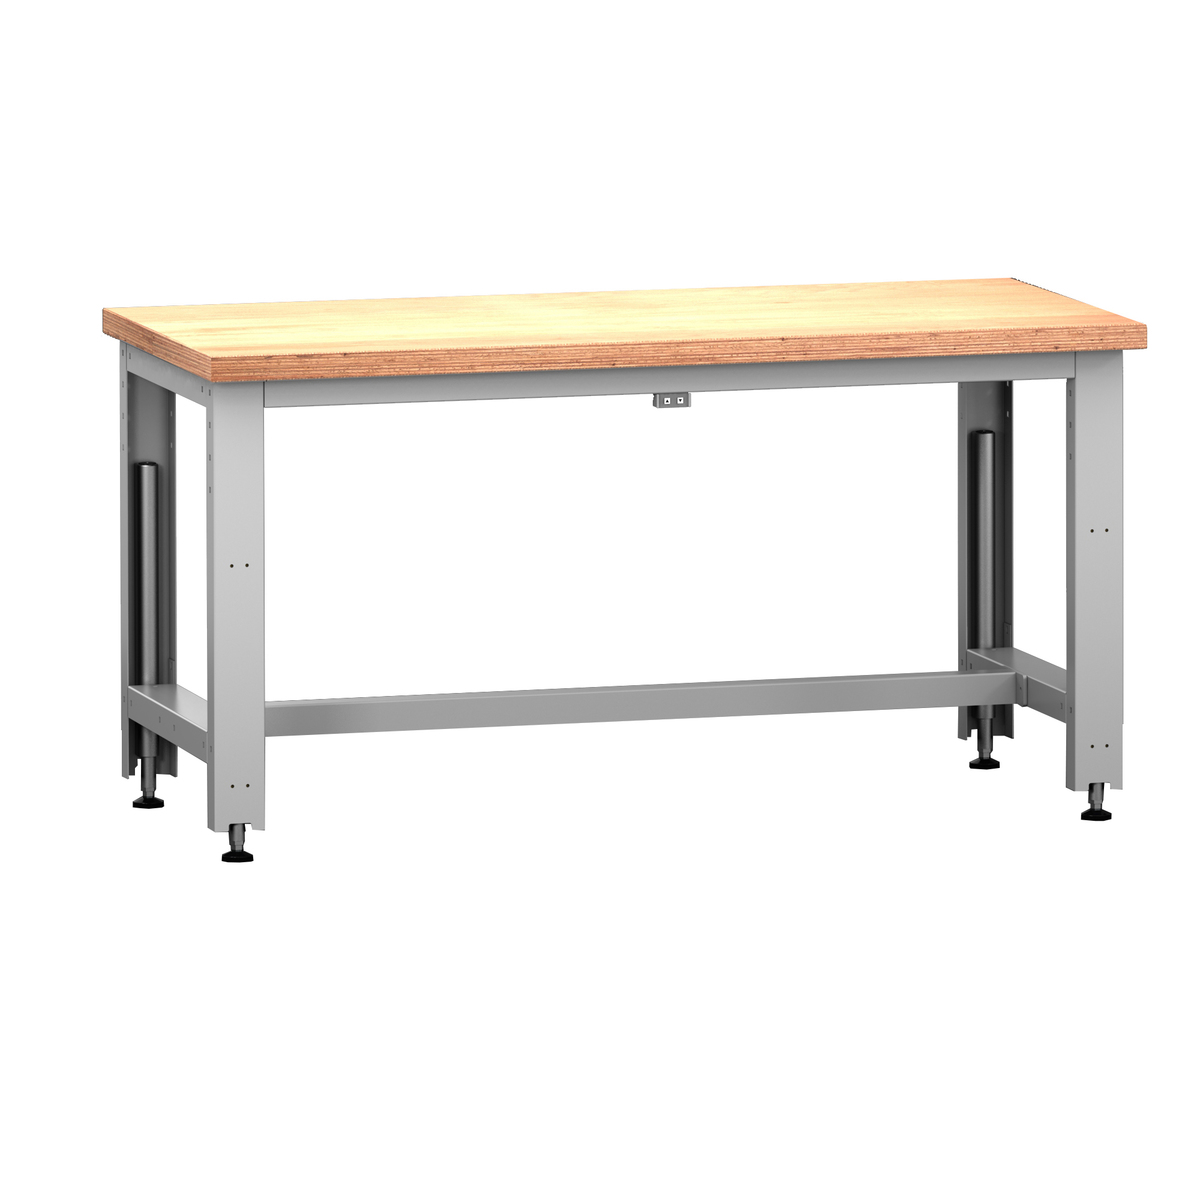 41003580.16 - cubio stepless adjustable height bench